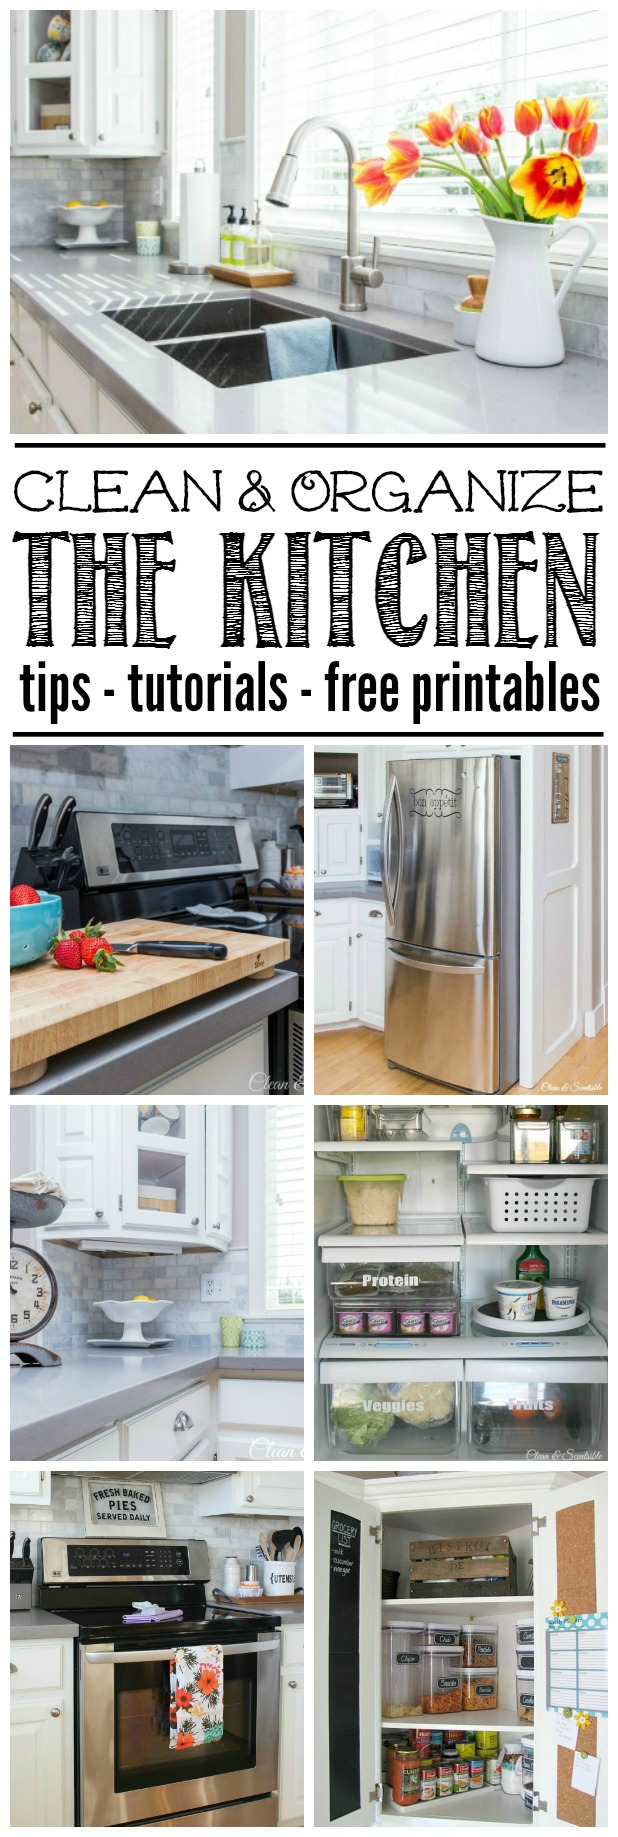 https://www.cleanandscentsible.com/wp-content/uploads/2016/02/How-to-Clean-and-Organize-the-Kitchen-Title.jpg